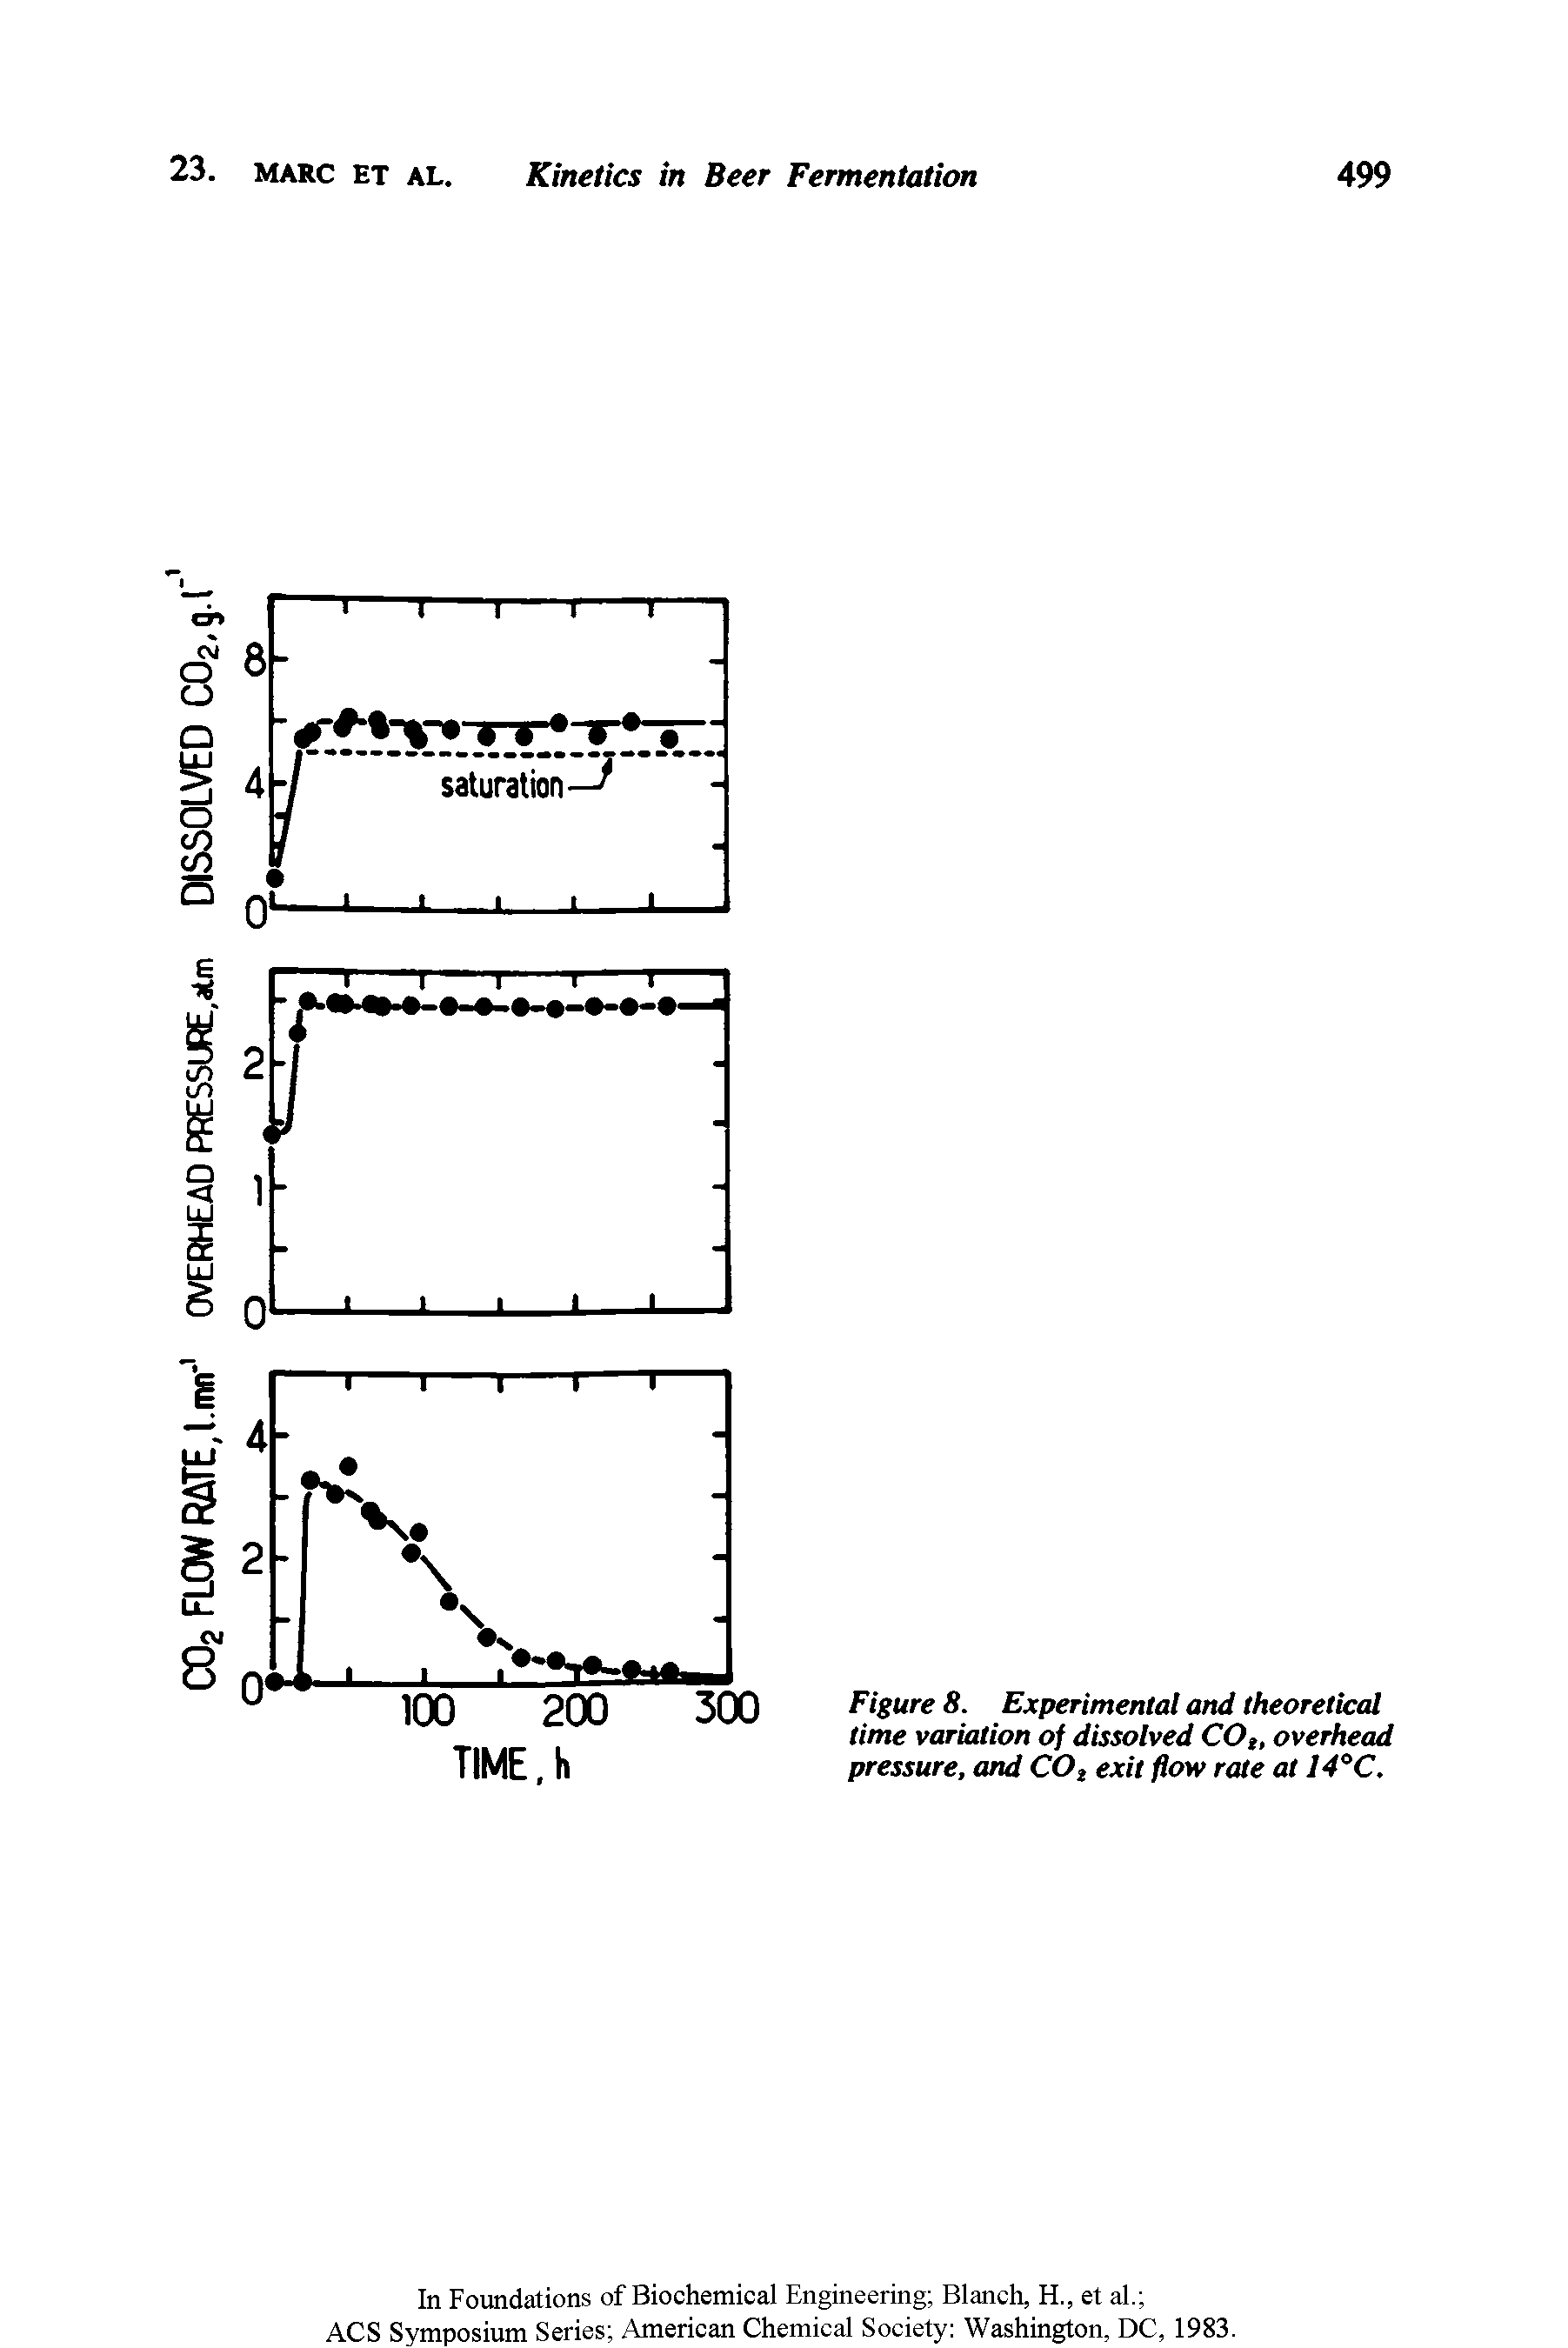 Figure 8. Experimental and theoretical time variation of dissolved COg, overhead pressure, and COg exit flow rate at I4°C.